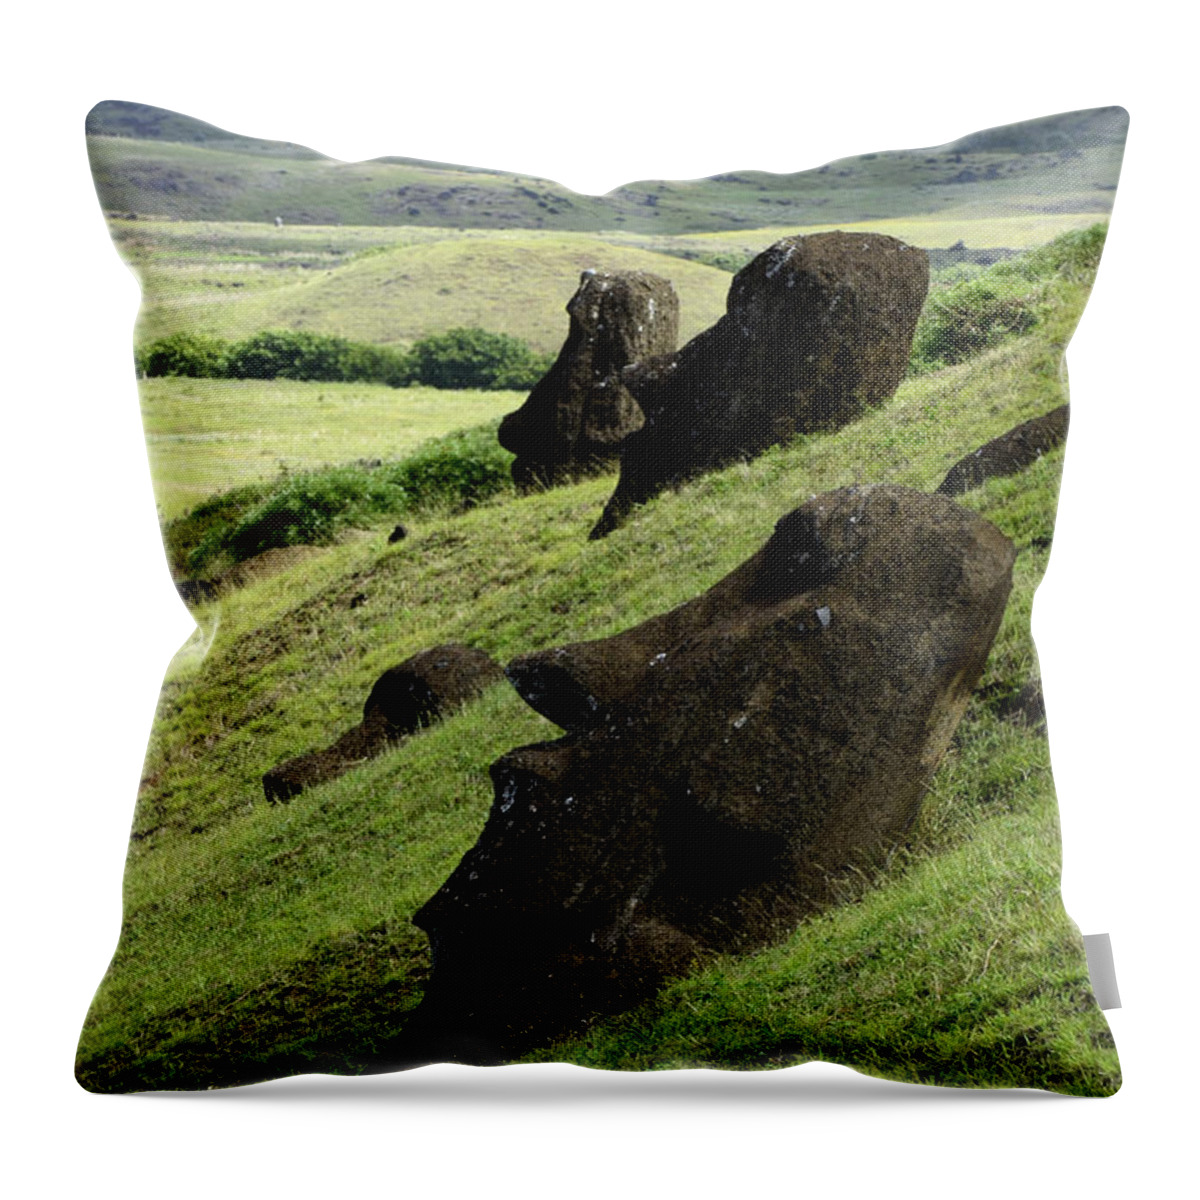 Easter Island Throw Pillow featuring the photograph Easter Island 17 by Bob Christopher